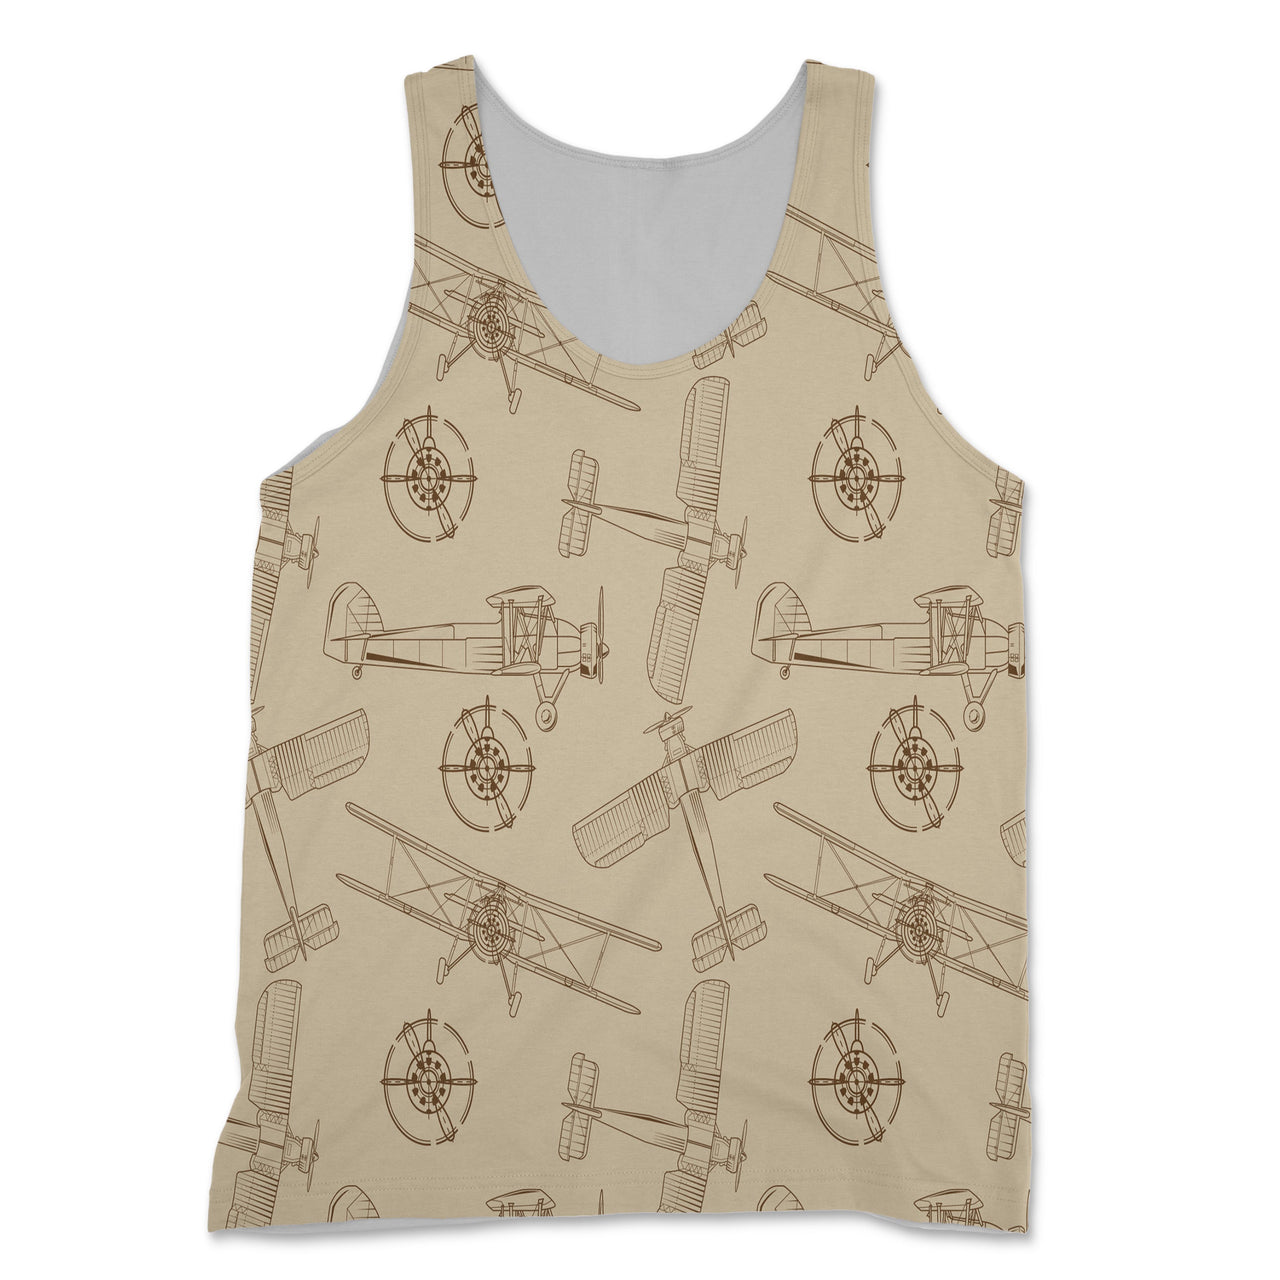 Very Cool Vintage Planes Designed 3D Tank Tops